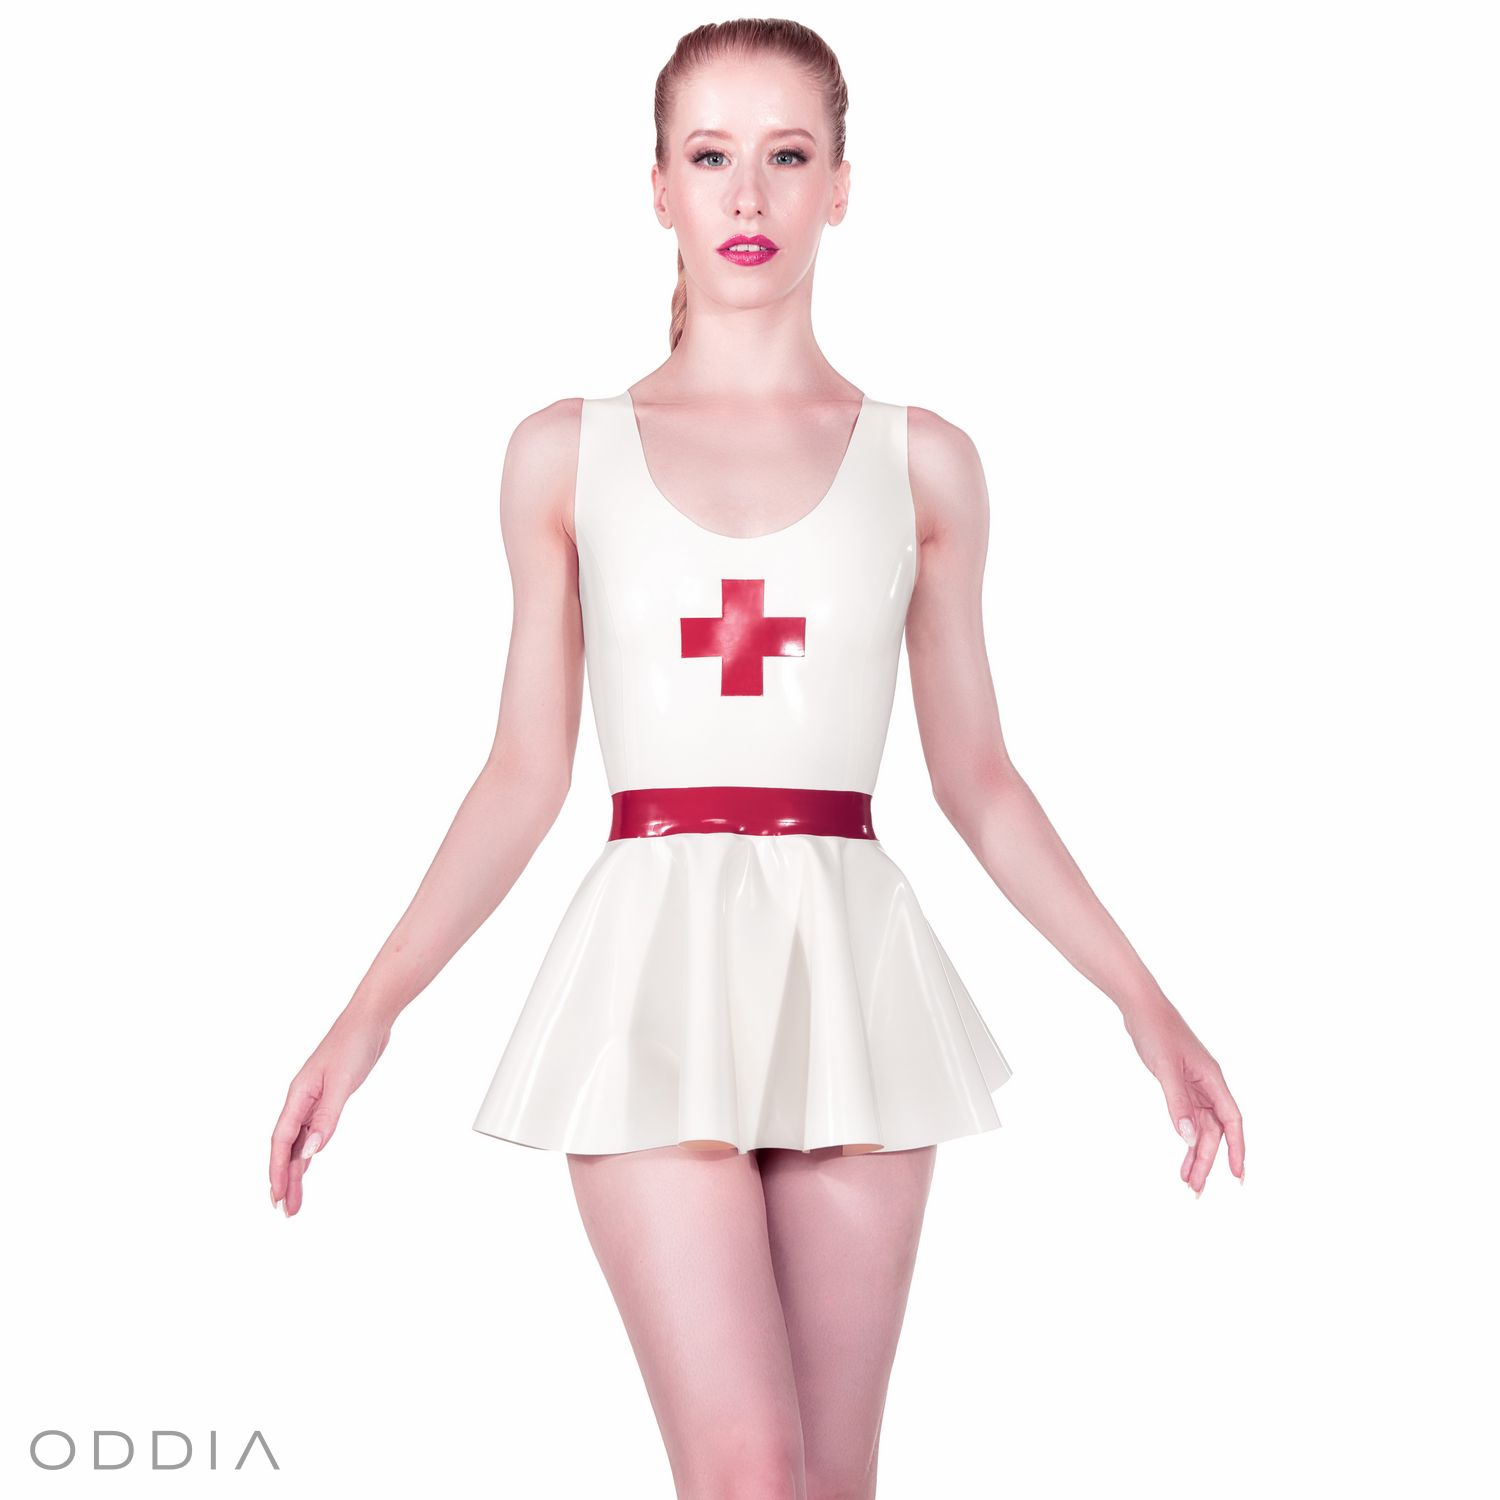 Girl in white latex dress with a cross and red belt. Short circle skirt and round neckline.